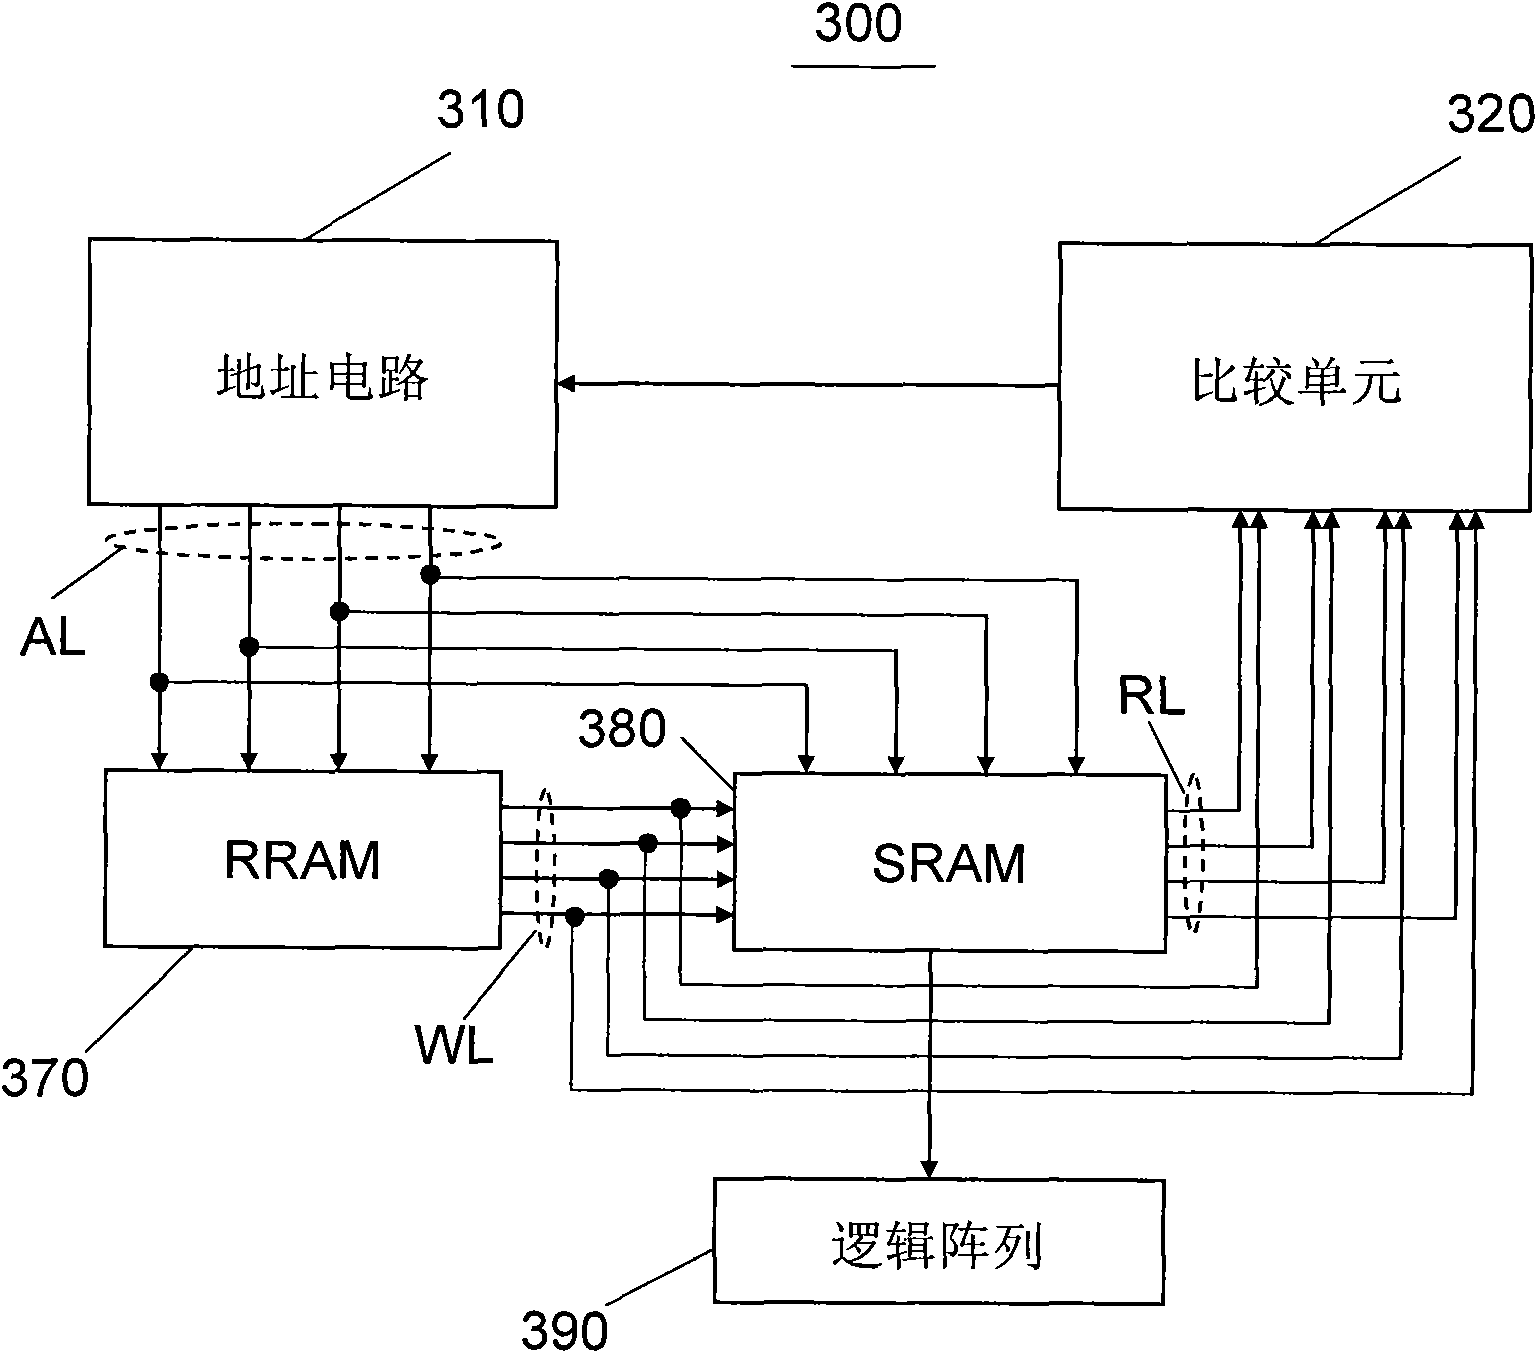 Single chip structured programmable logic device with resistance random access memory (RAM) module